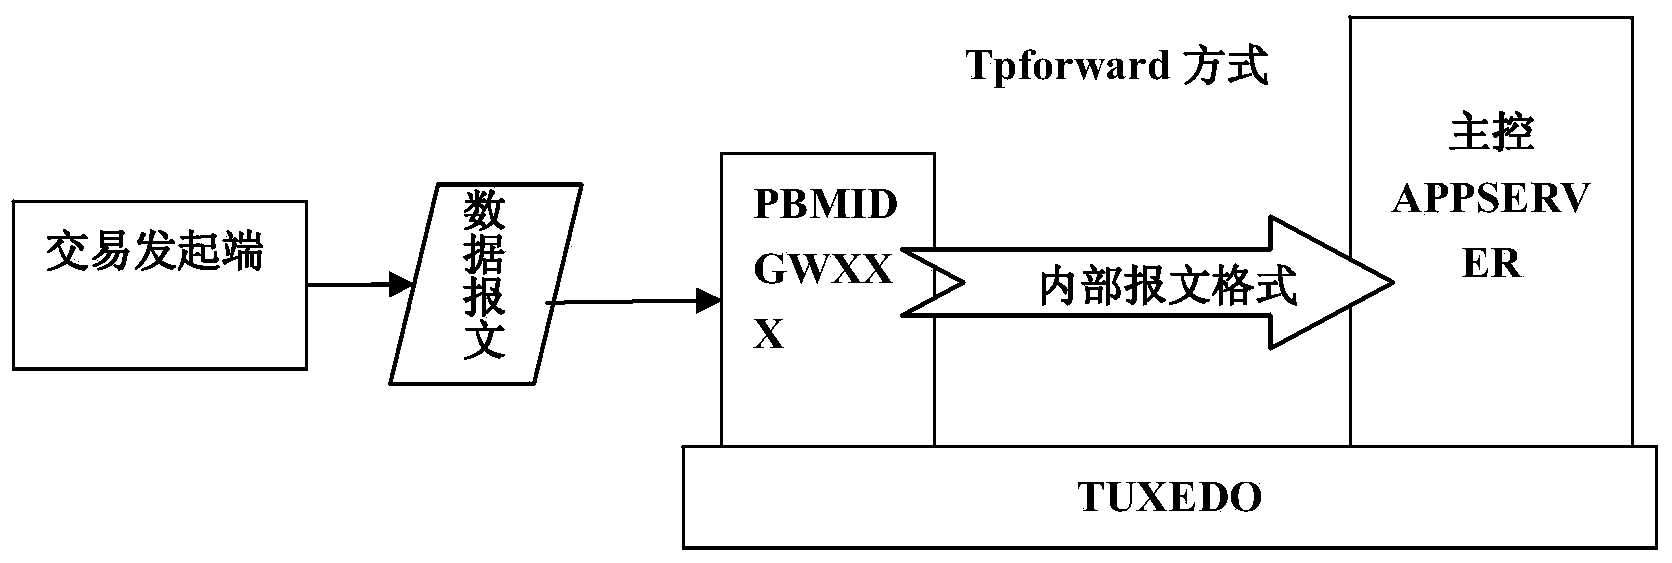 Method and device for system to achieve flow control based on TUXEDO middleware